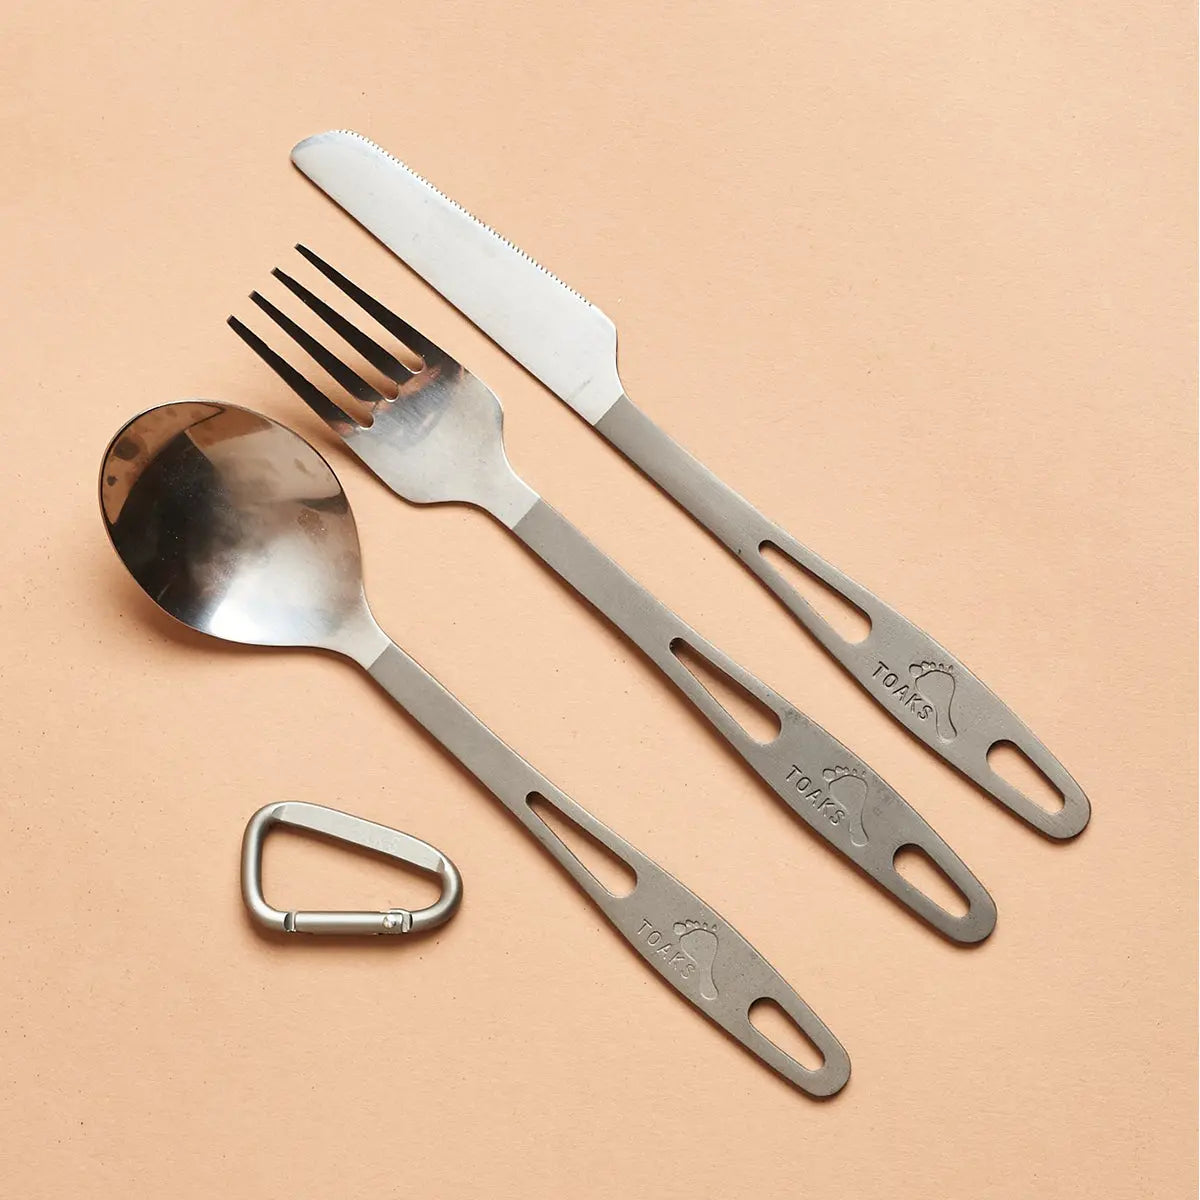 TOAKS Three-Piece Polished Head Titanium Cutlery Set with Matte Finish Handles TOAKS